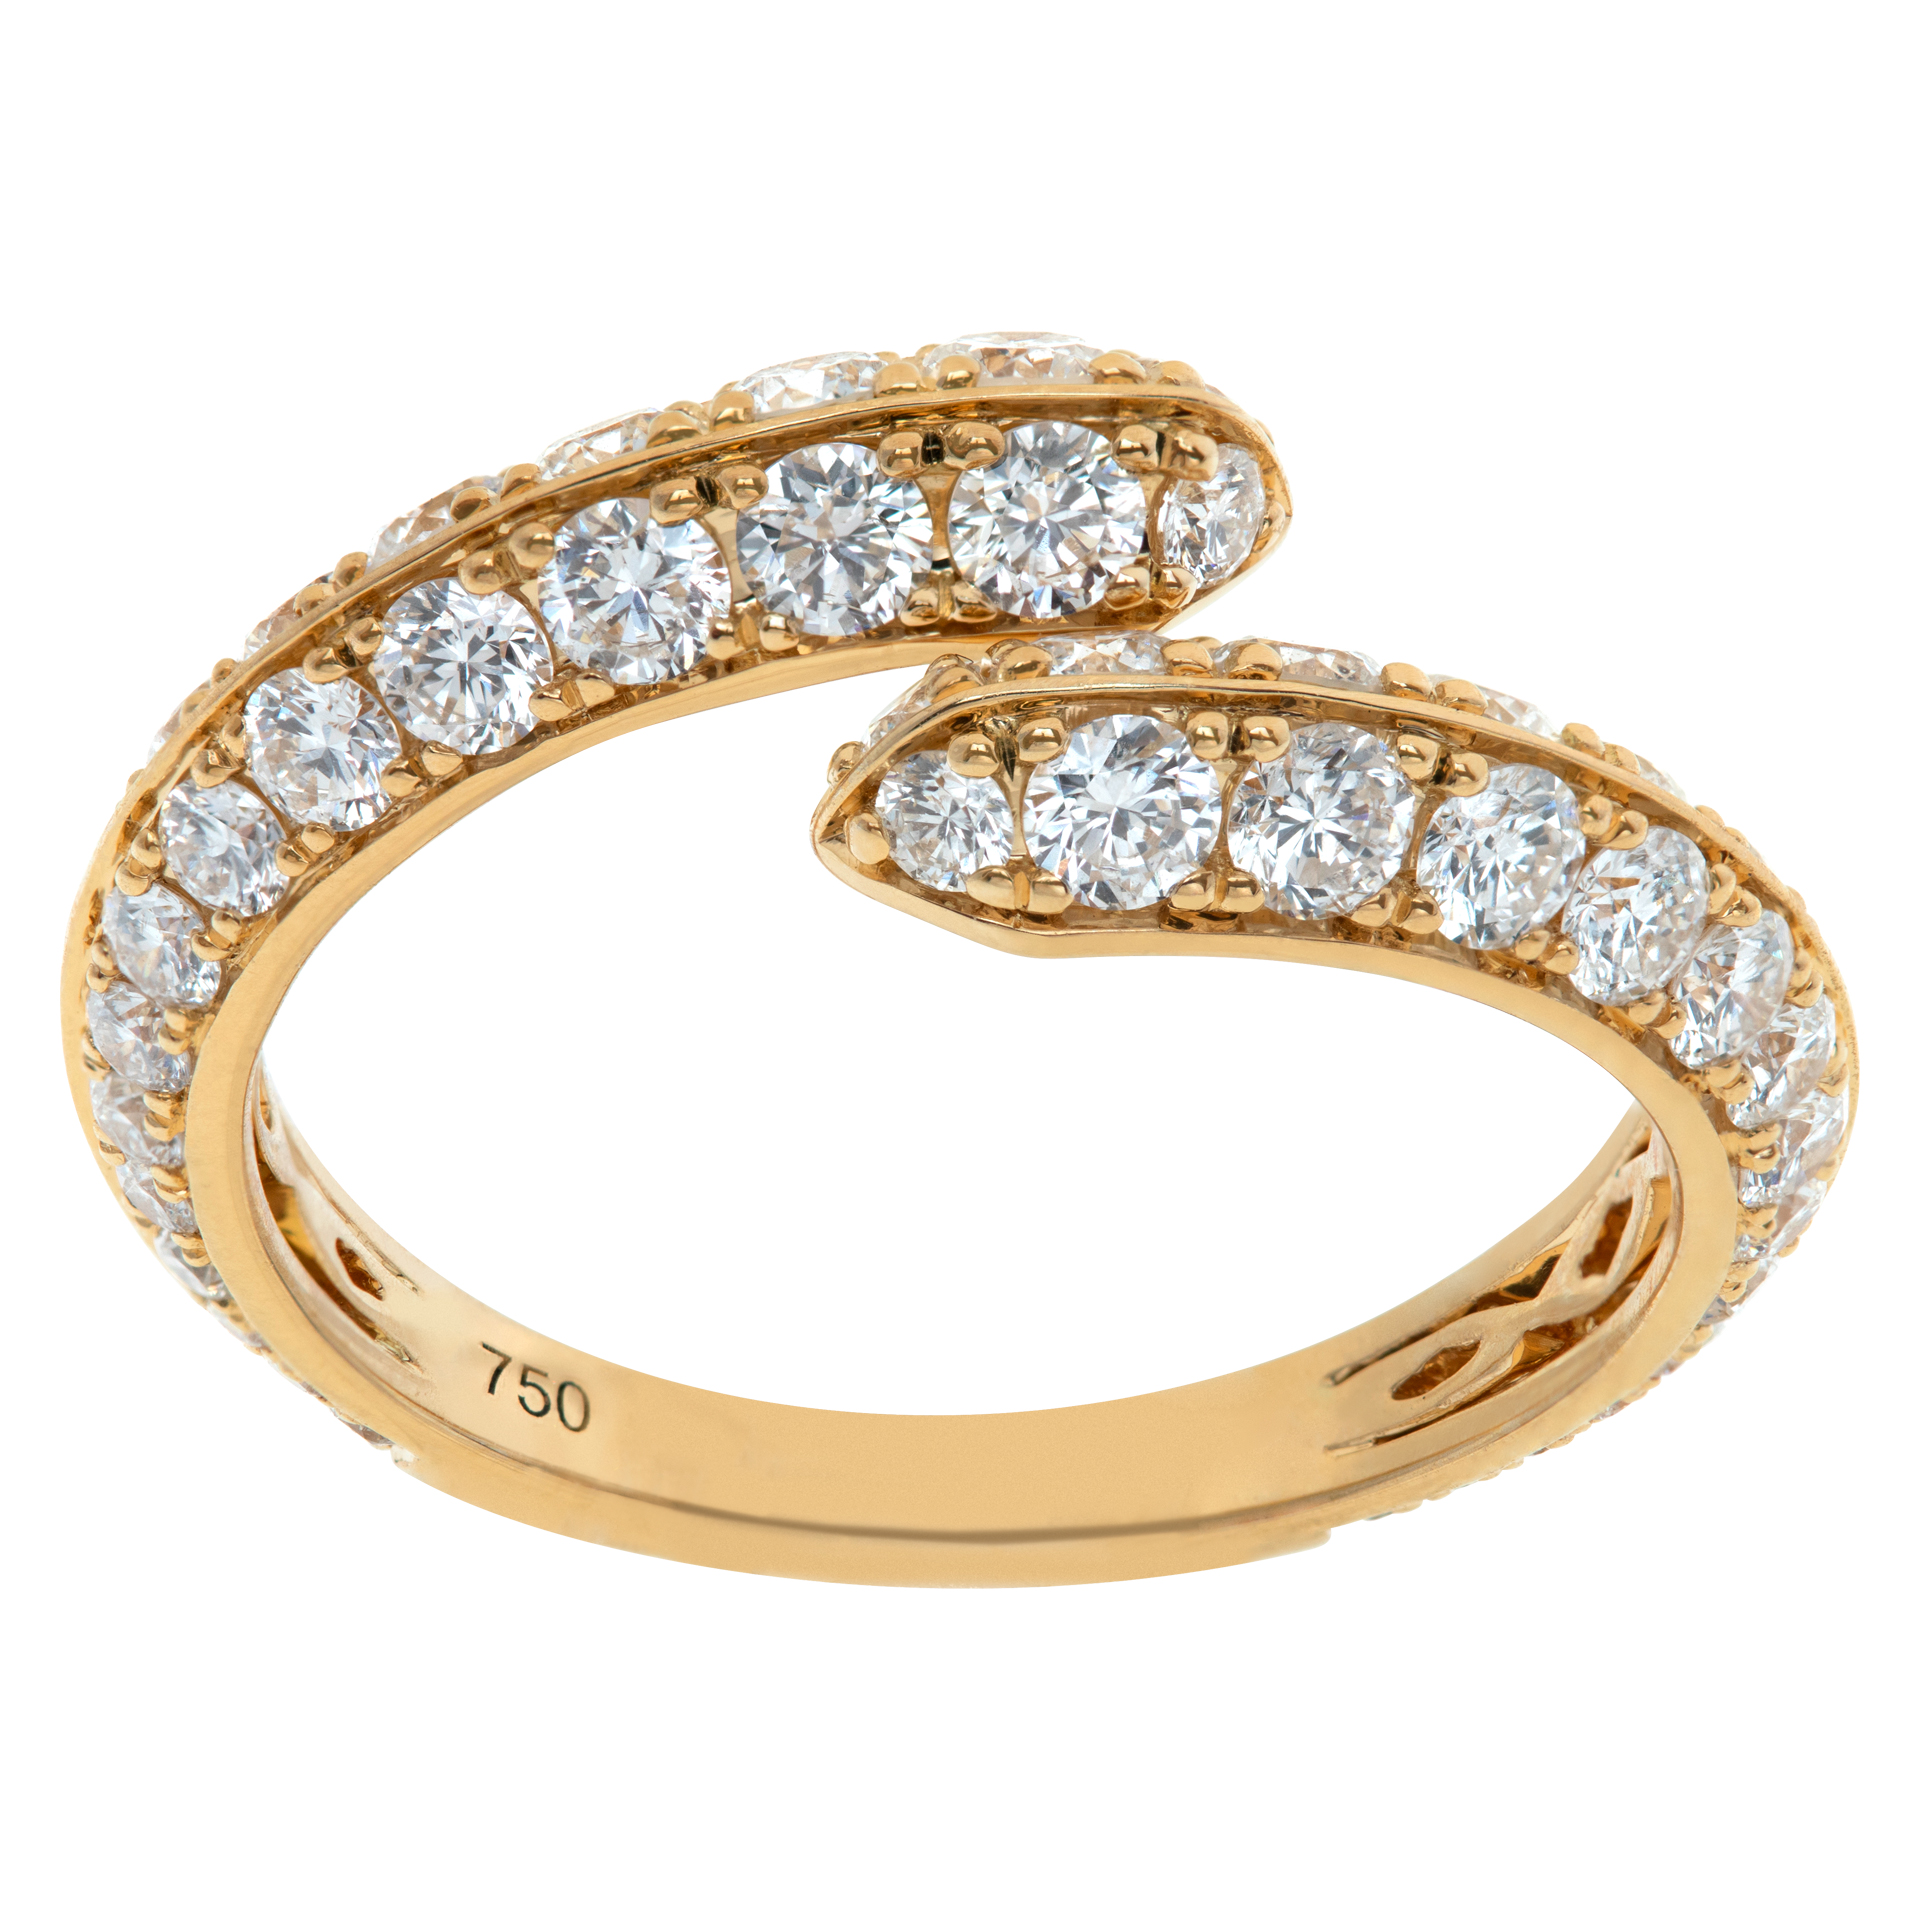 18k yellow gold ring with 1.62 carats in round brilliant cut diamonds